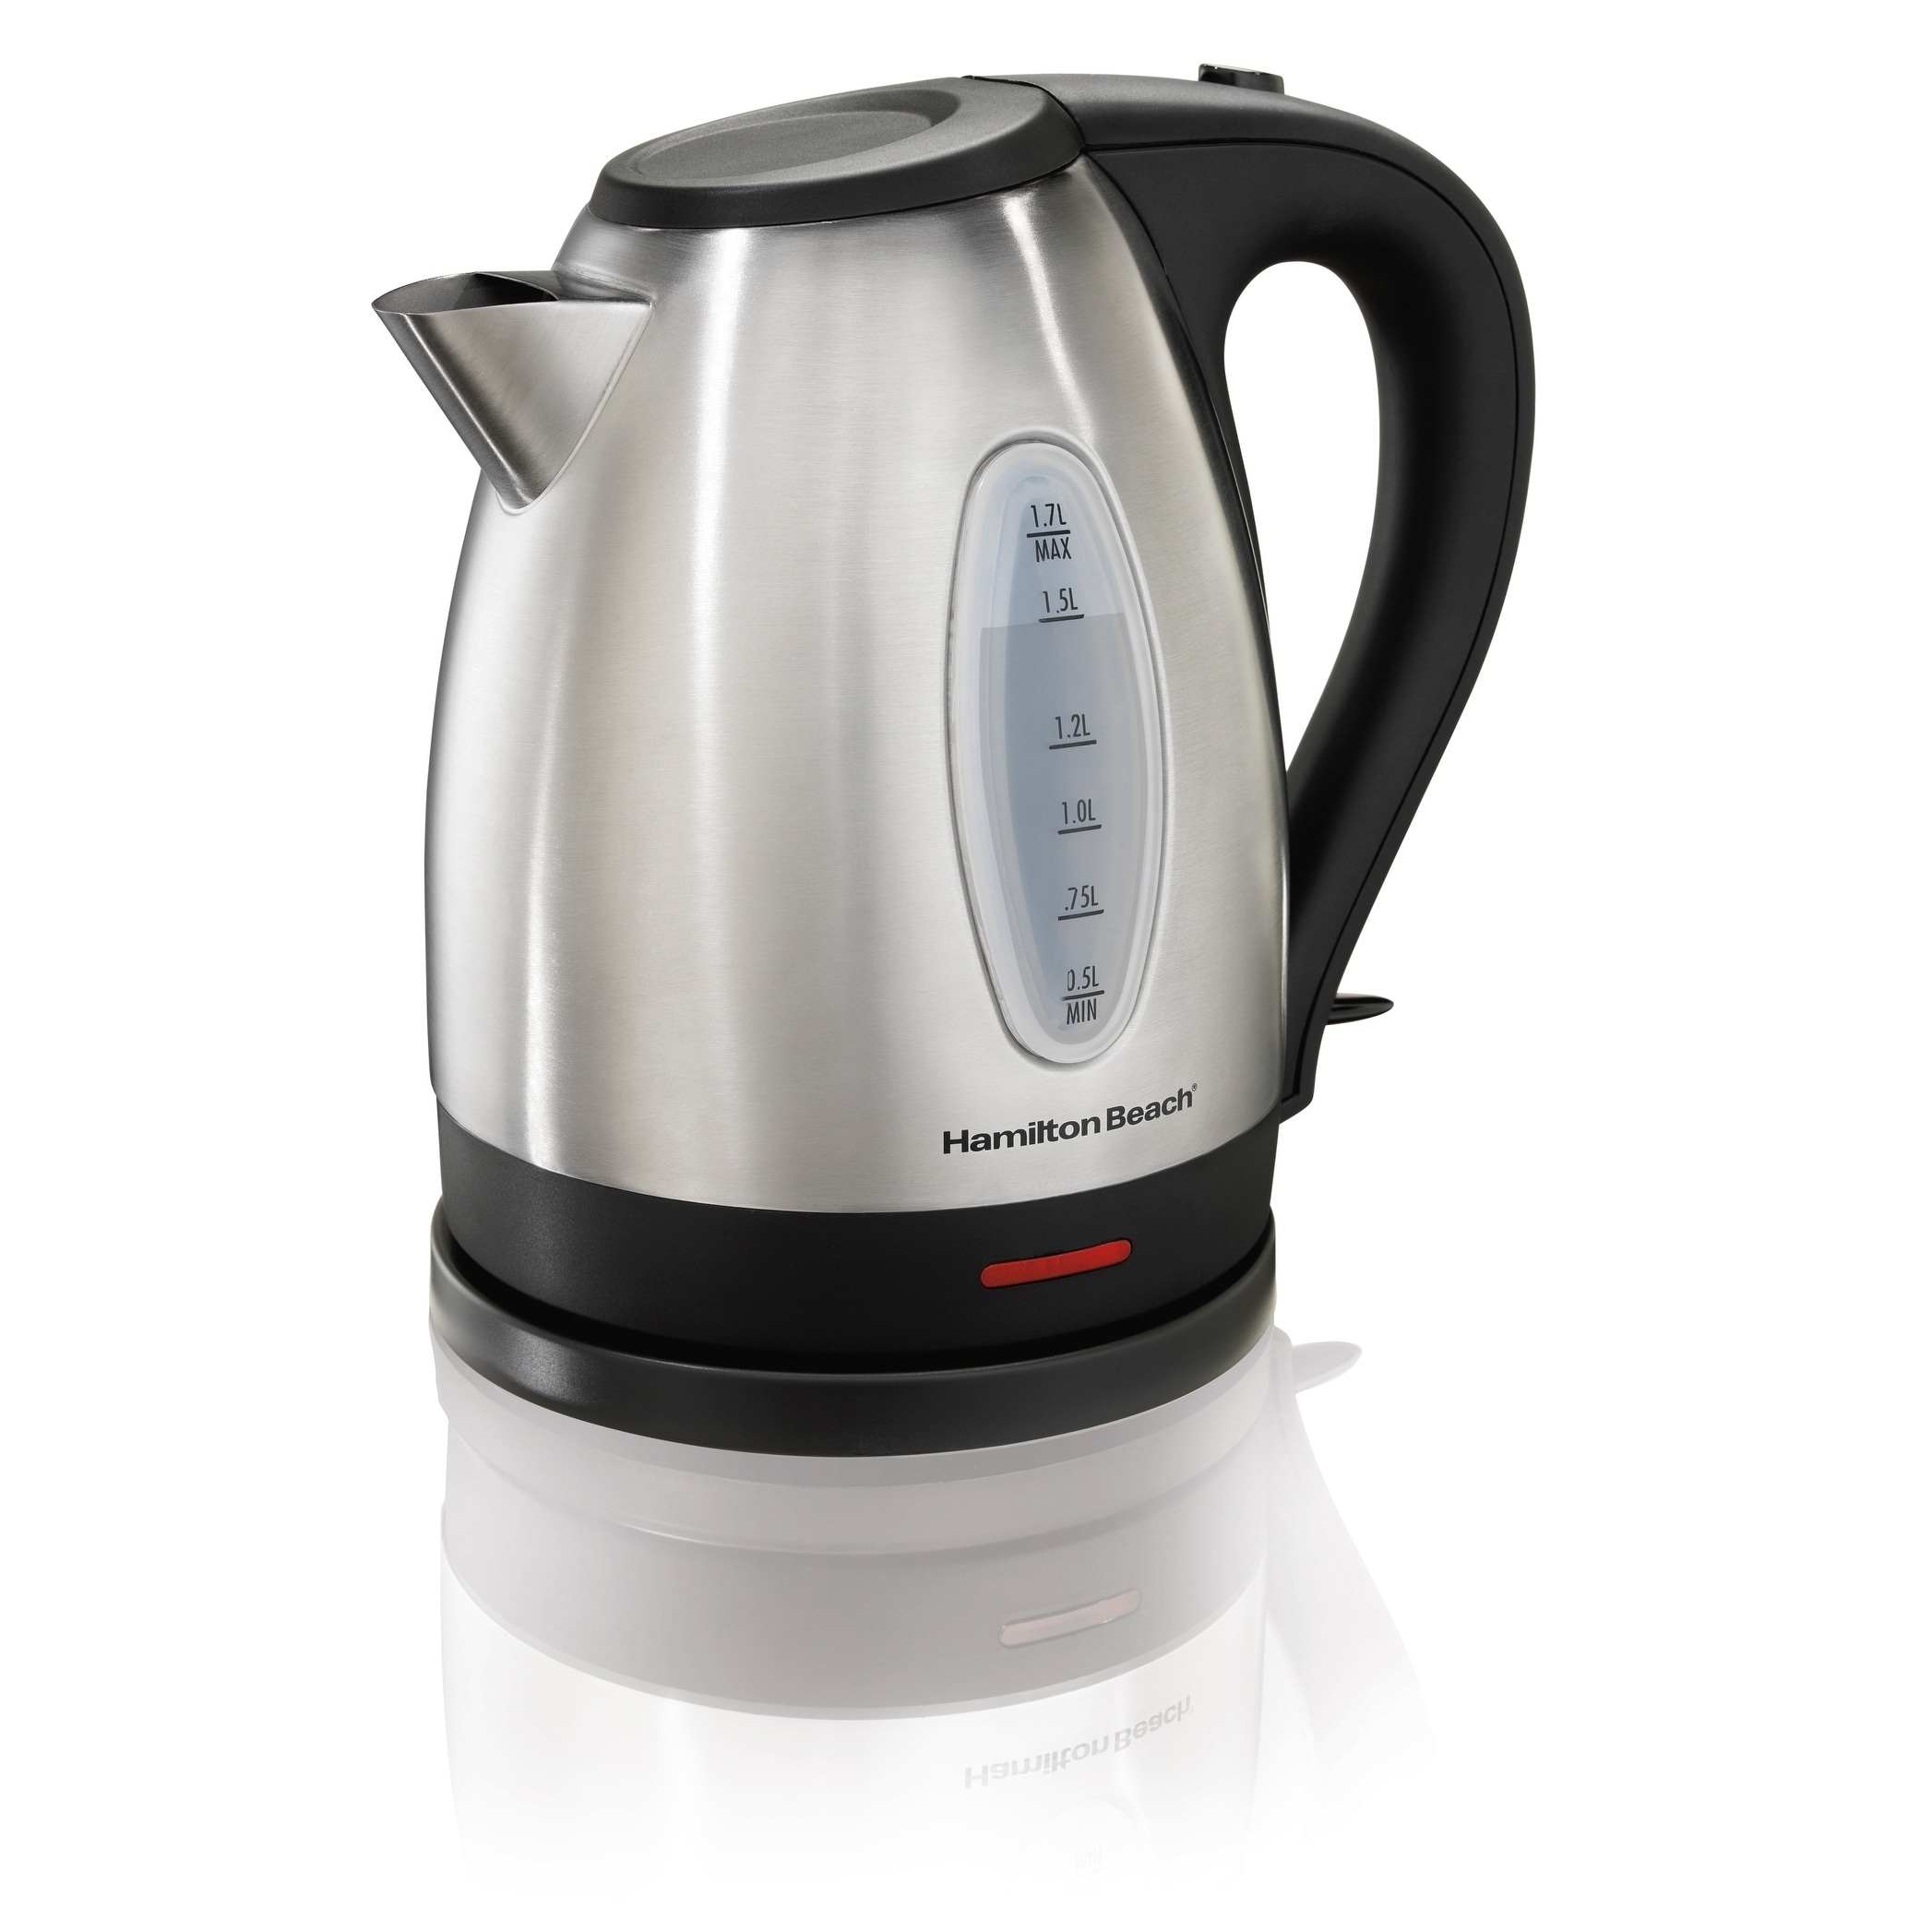 1.7-Liter Electric Kettle 1500 W Tea Kettle with One-Touch Activation